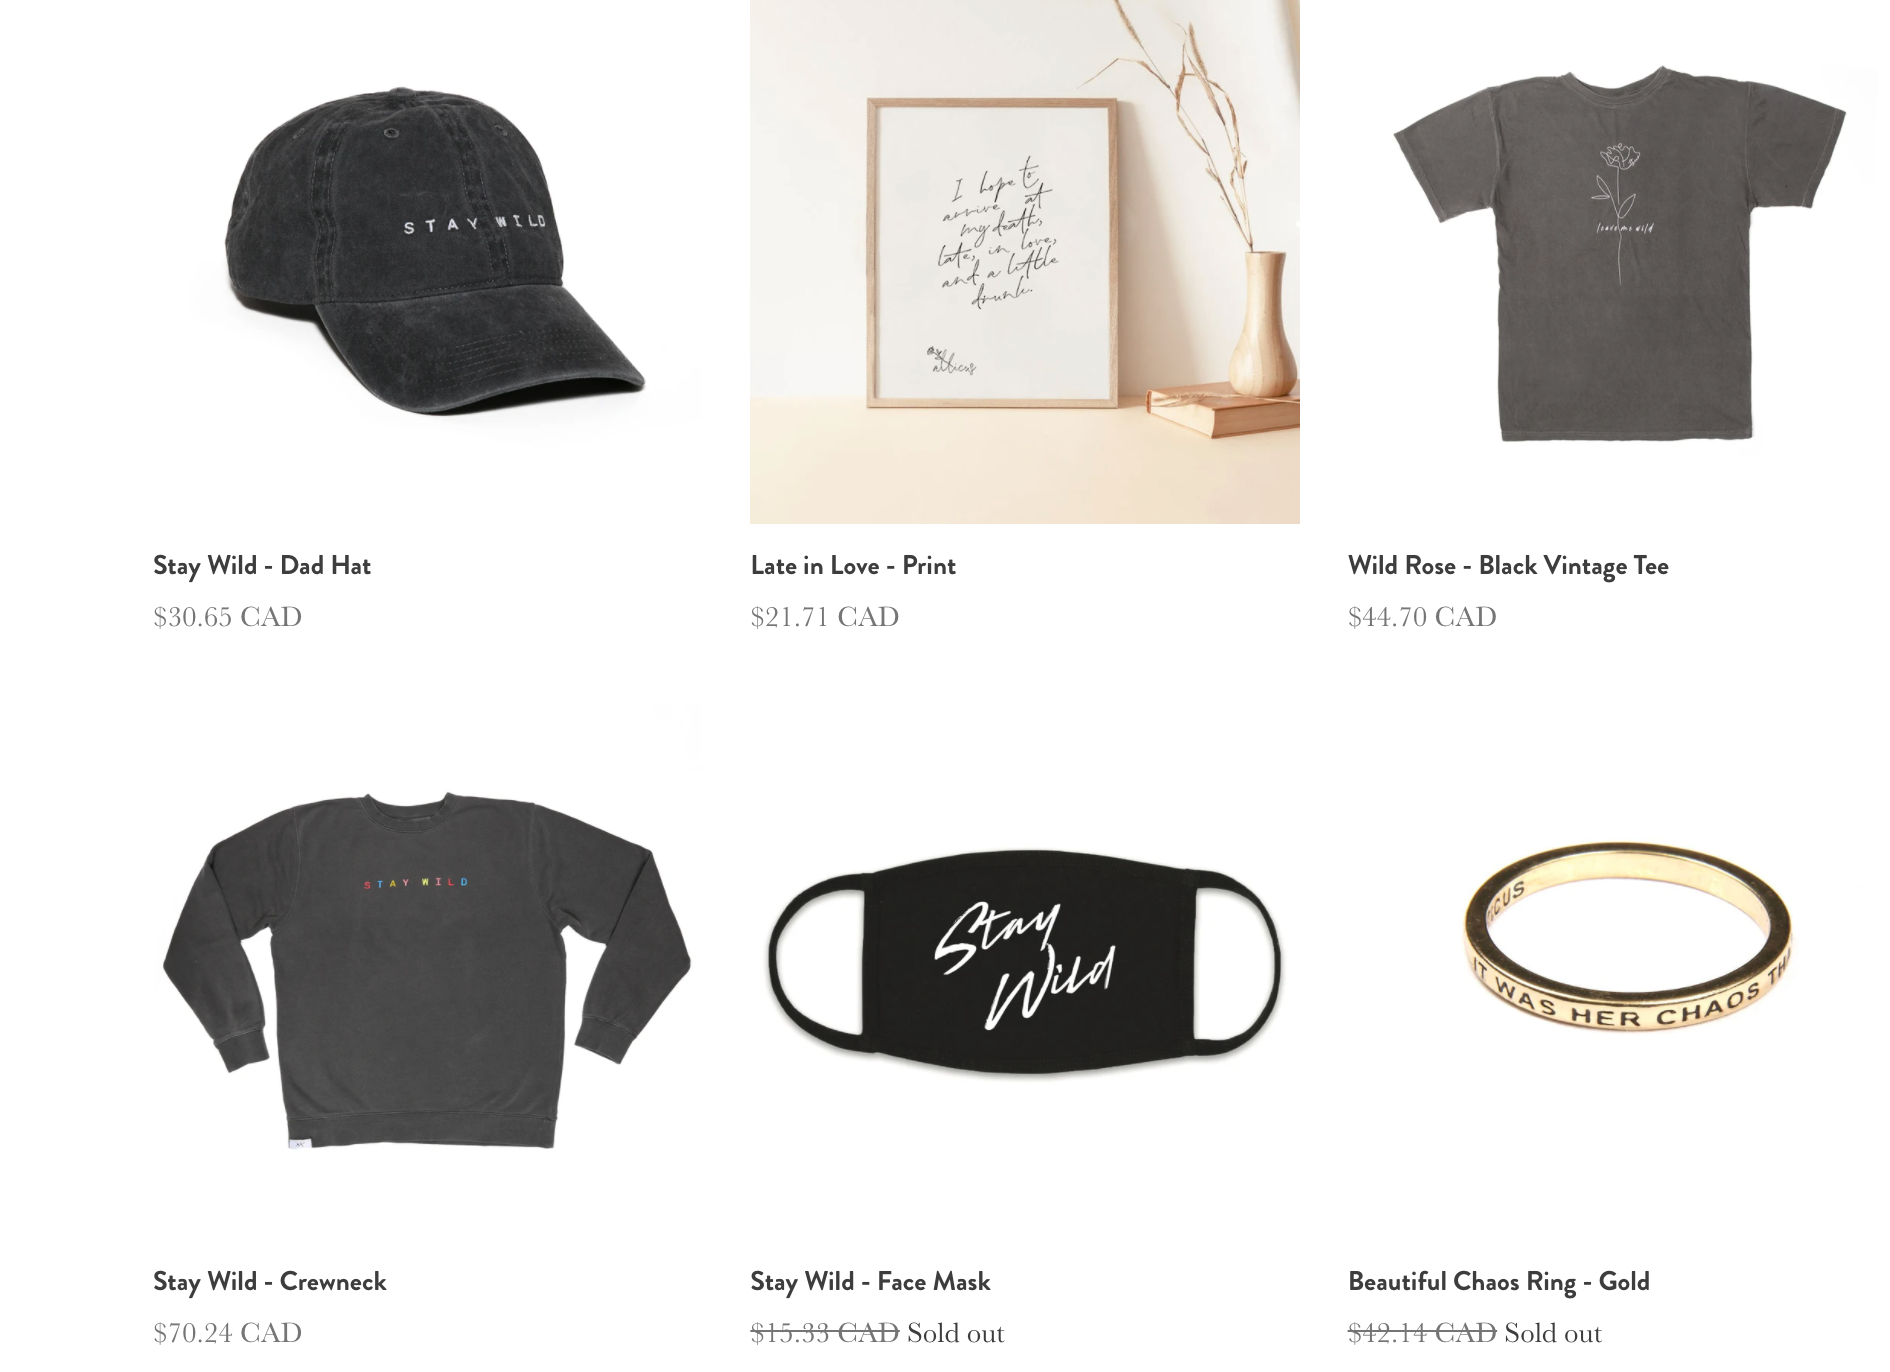 atticus's merch store, which sells dad hats, prints, rings, and more